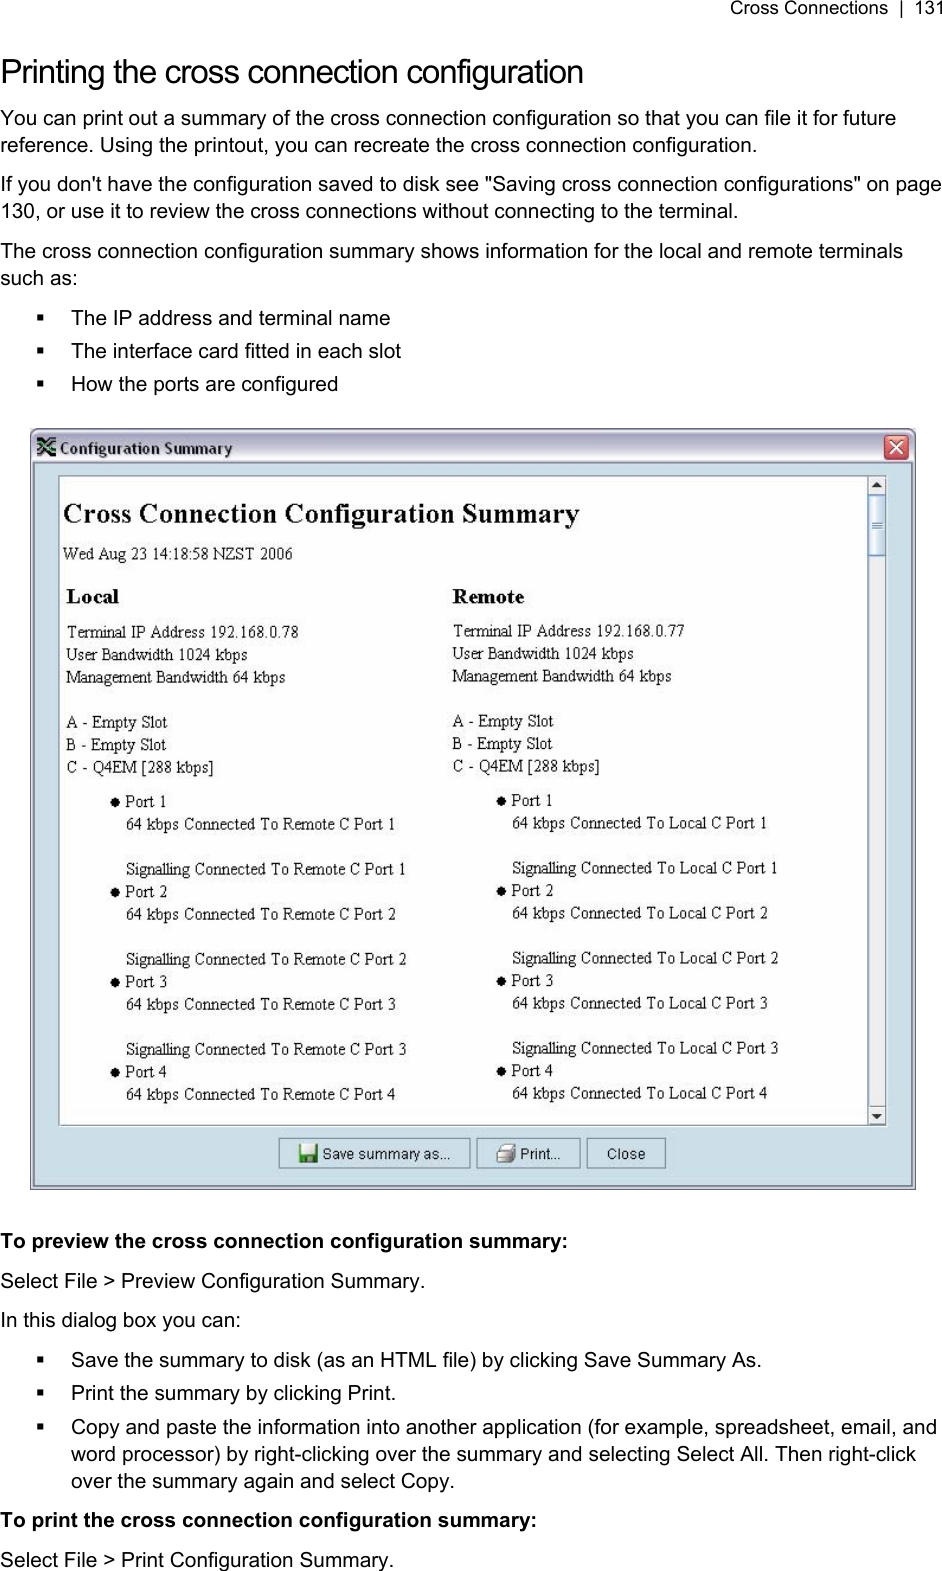 Cross Connections  |  131   Printing the cross connection configuration You can print out a summary of the cross connection configuration so that you can file it for future reference. Using the printout, you can recreate the cross connection configuration. If you don&apos;t have the configuration saved to disk see &quot;Saving cross connection configurations&quot; on page 130, or use it to review the cross connections without connecting to the terminal. The cross connection configuration summary shows information for the local and remote terminals such as:   The IP address and terminal name   The interface card fitted in each slot   How the ports are configured    To preview the cross connection configuration summary: Select File &gt; Preview Configuration Summary. In this dialog box you can:   Save the summary to disk (as an HTML file) by clicking Save Summary As.   Print the summary by clicking Print.   Copy and paste the information into another application (for example, spreadsheet, email, and word processor) by right-clicking over the summary and selecting Select All. Then right-click over the summary again and select Copy. To print the cross connection configuration summary: Select File &gt; Print Configuration Summary.  